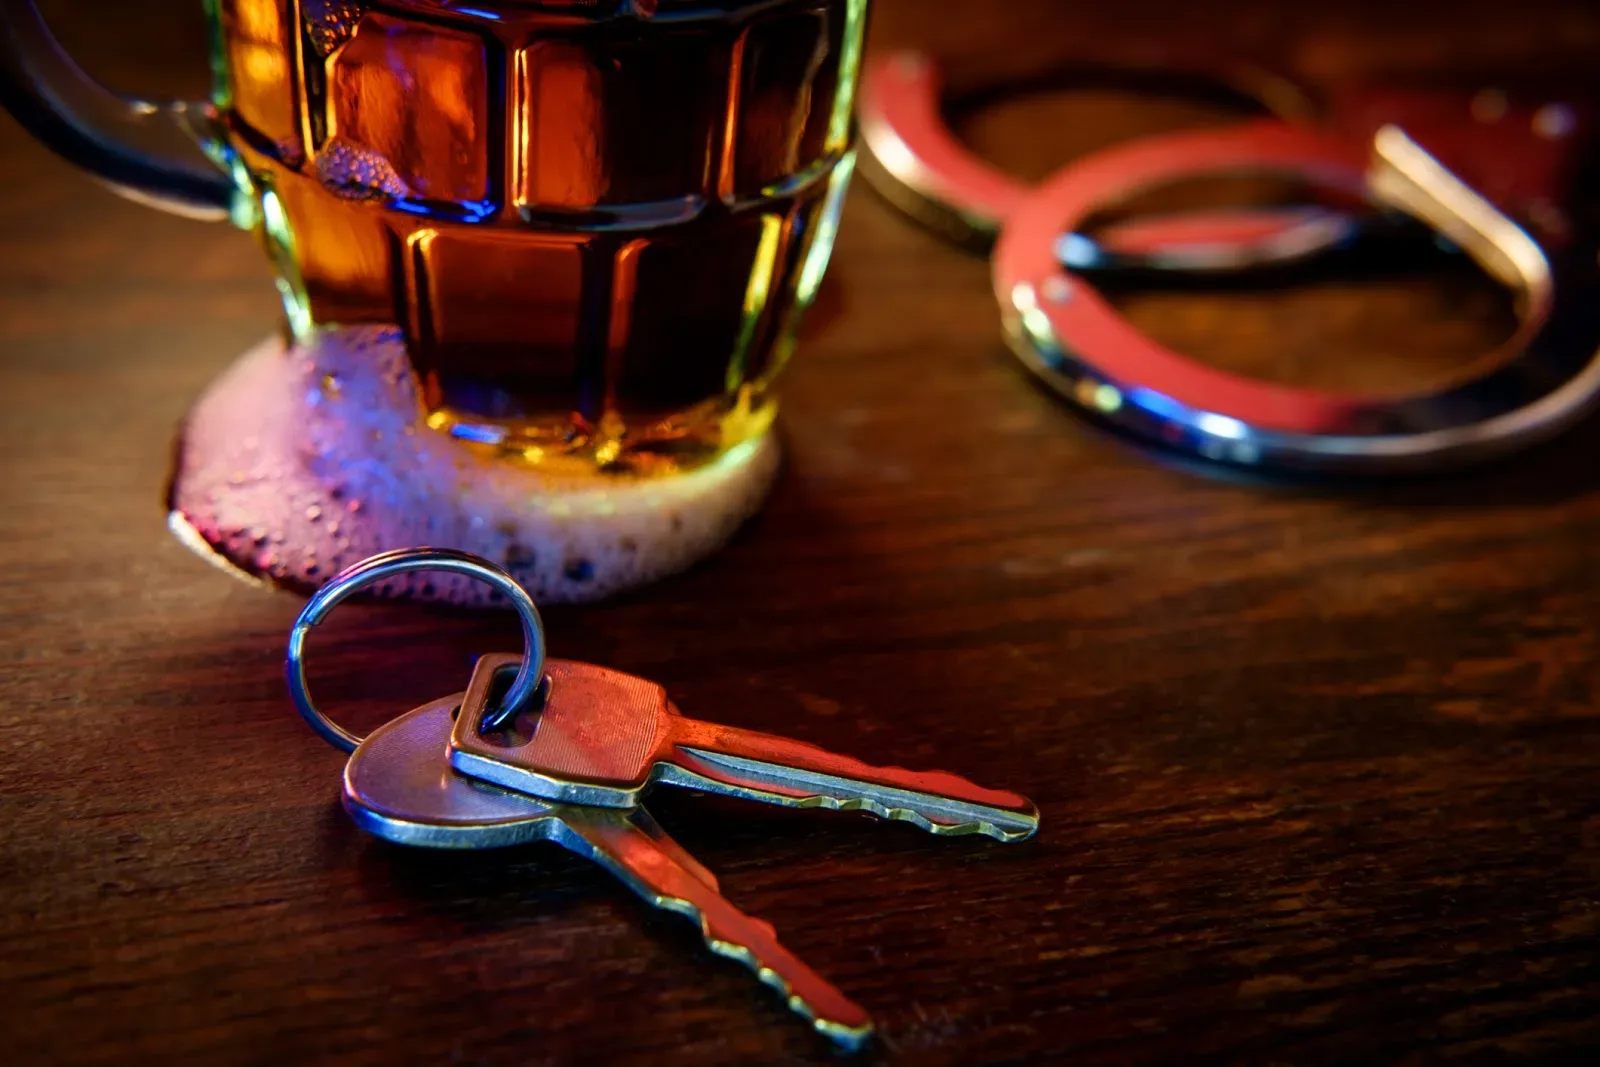 Mug of frothy beer with handcuffs and keys symbolizing drunk driving arrest